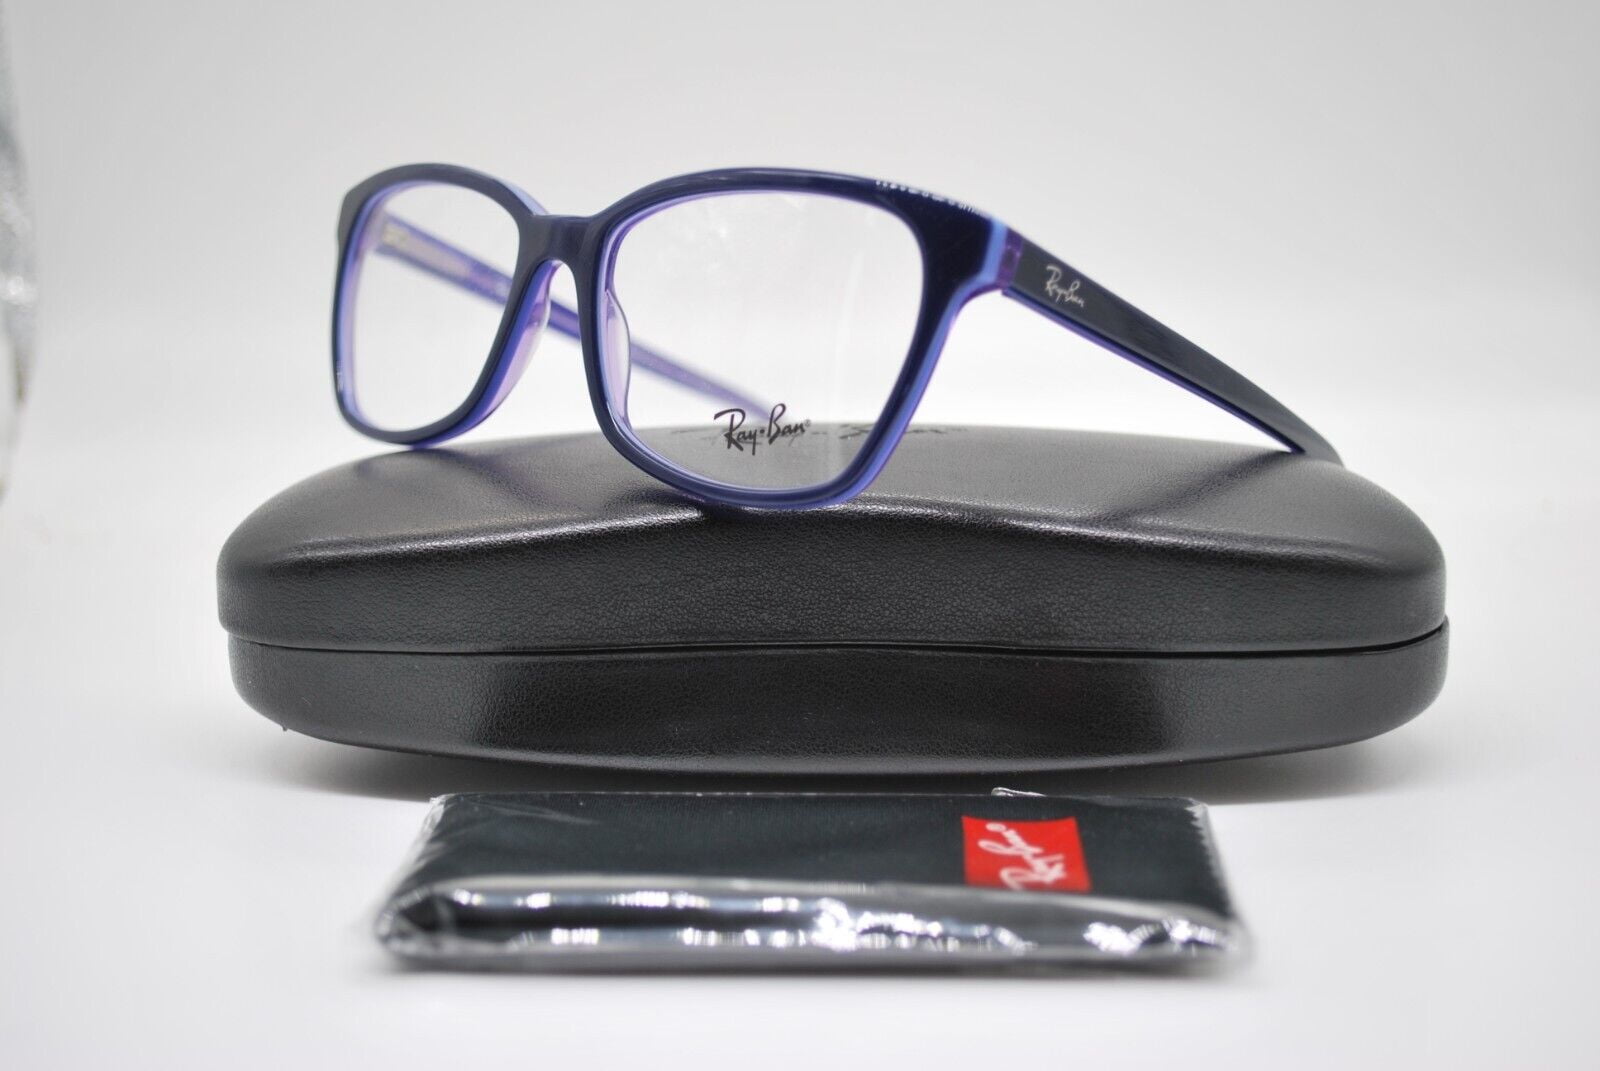 NEW RAY BAN RB 5362 5776 BLUE VIOLET AUTHENTIC EYEGLASSES FRAMES RX 54-17 -  